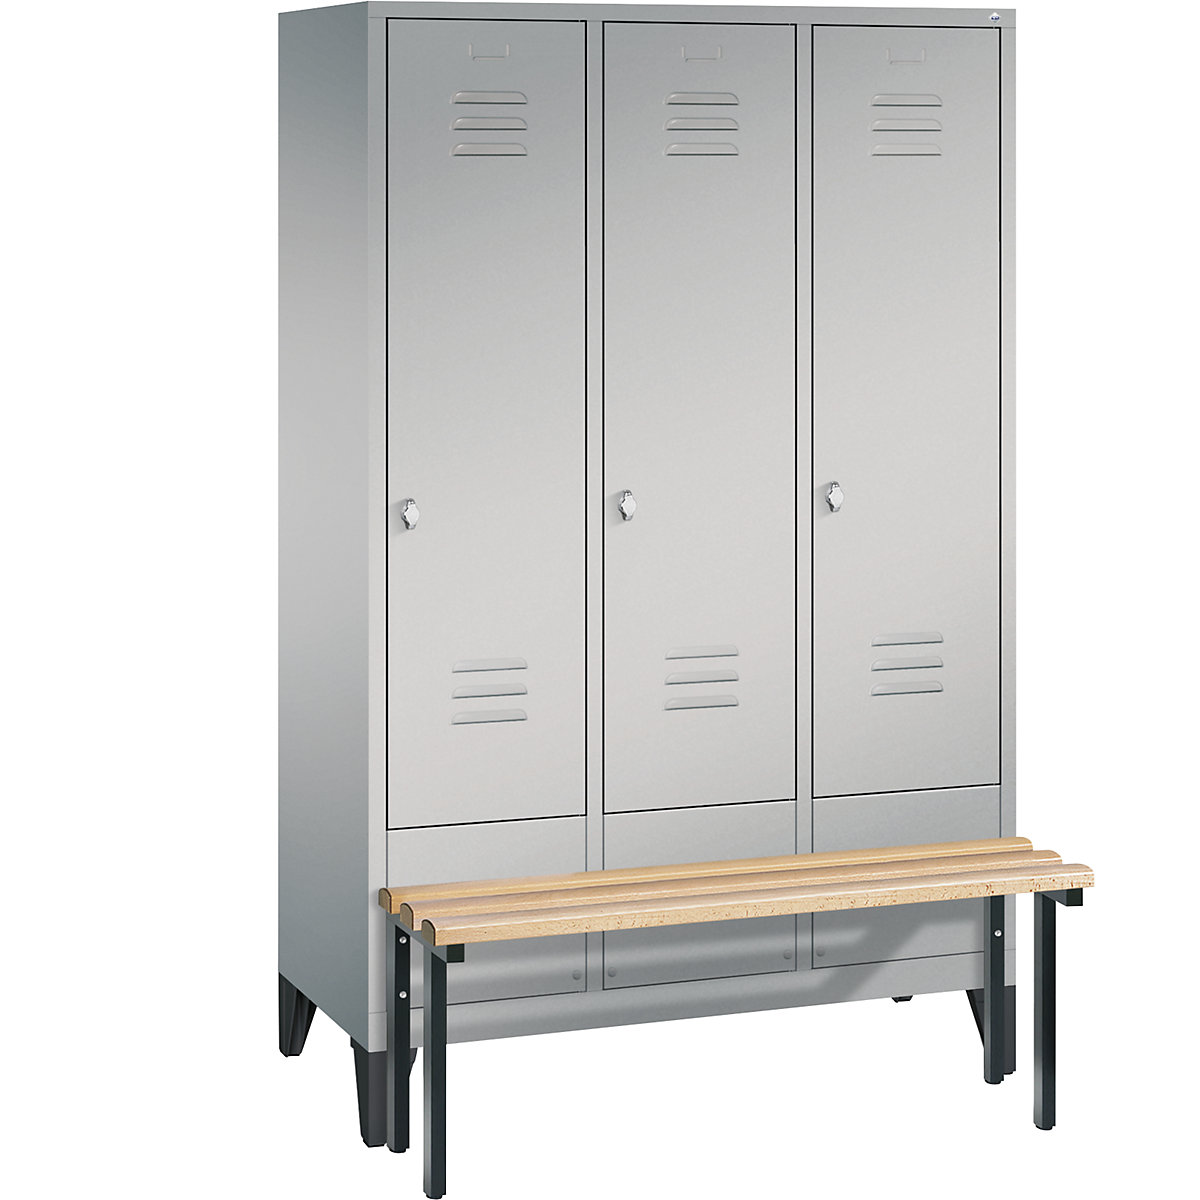 CLASSIC cloakroom locker with bench mounted in front – C+P, 3 compartments, compartment width 400 mm, white aluminium-11